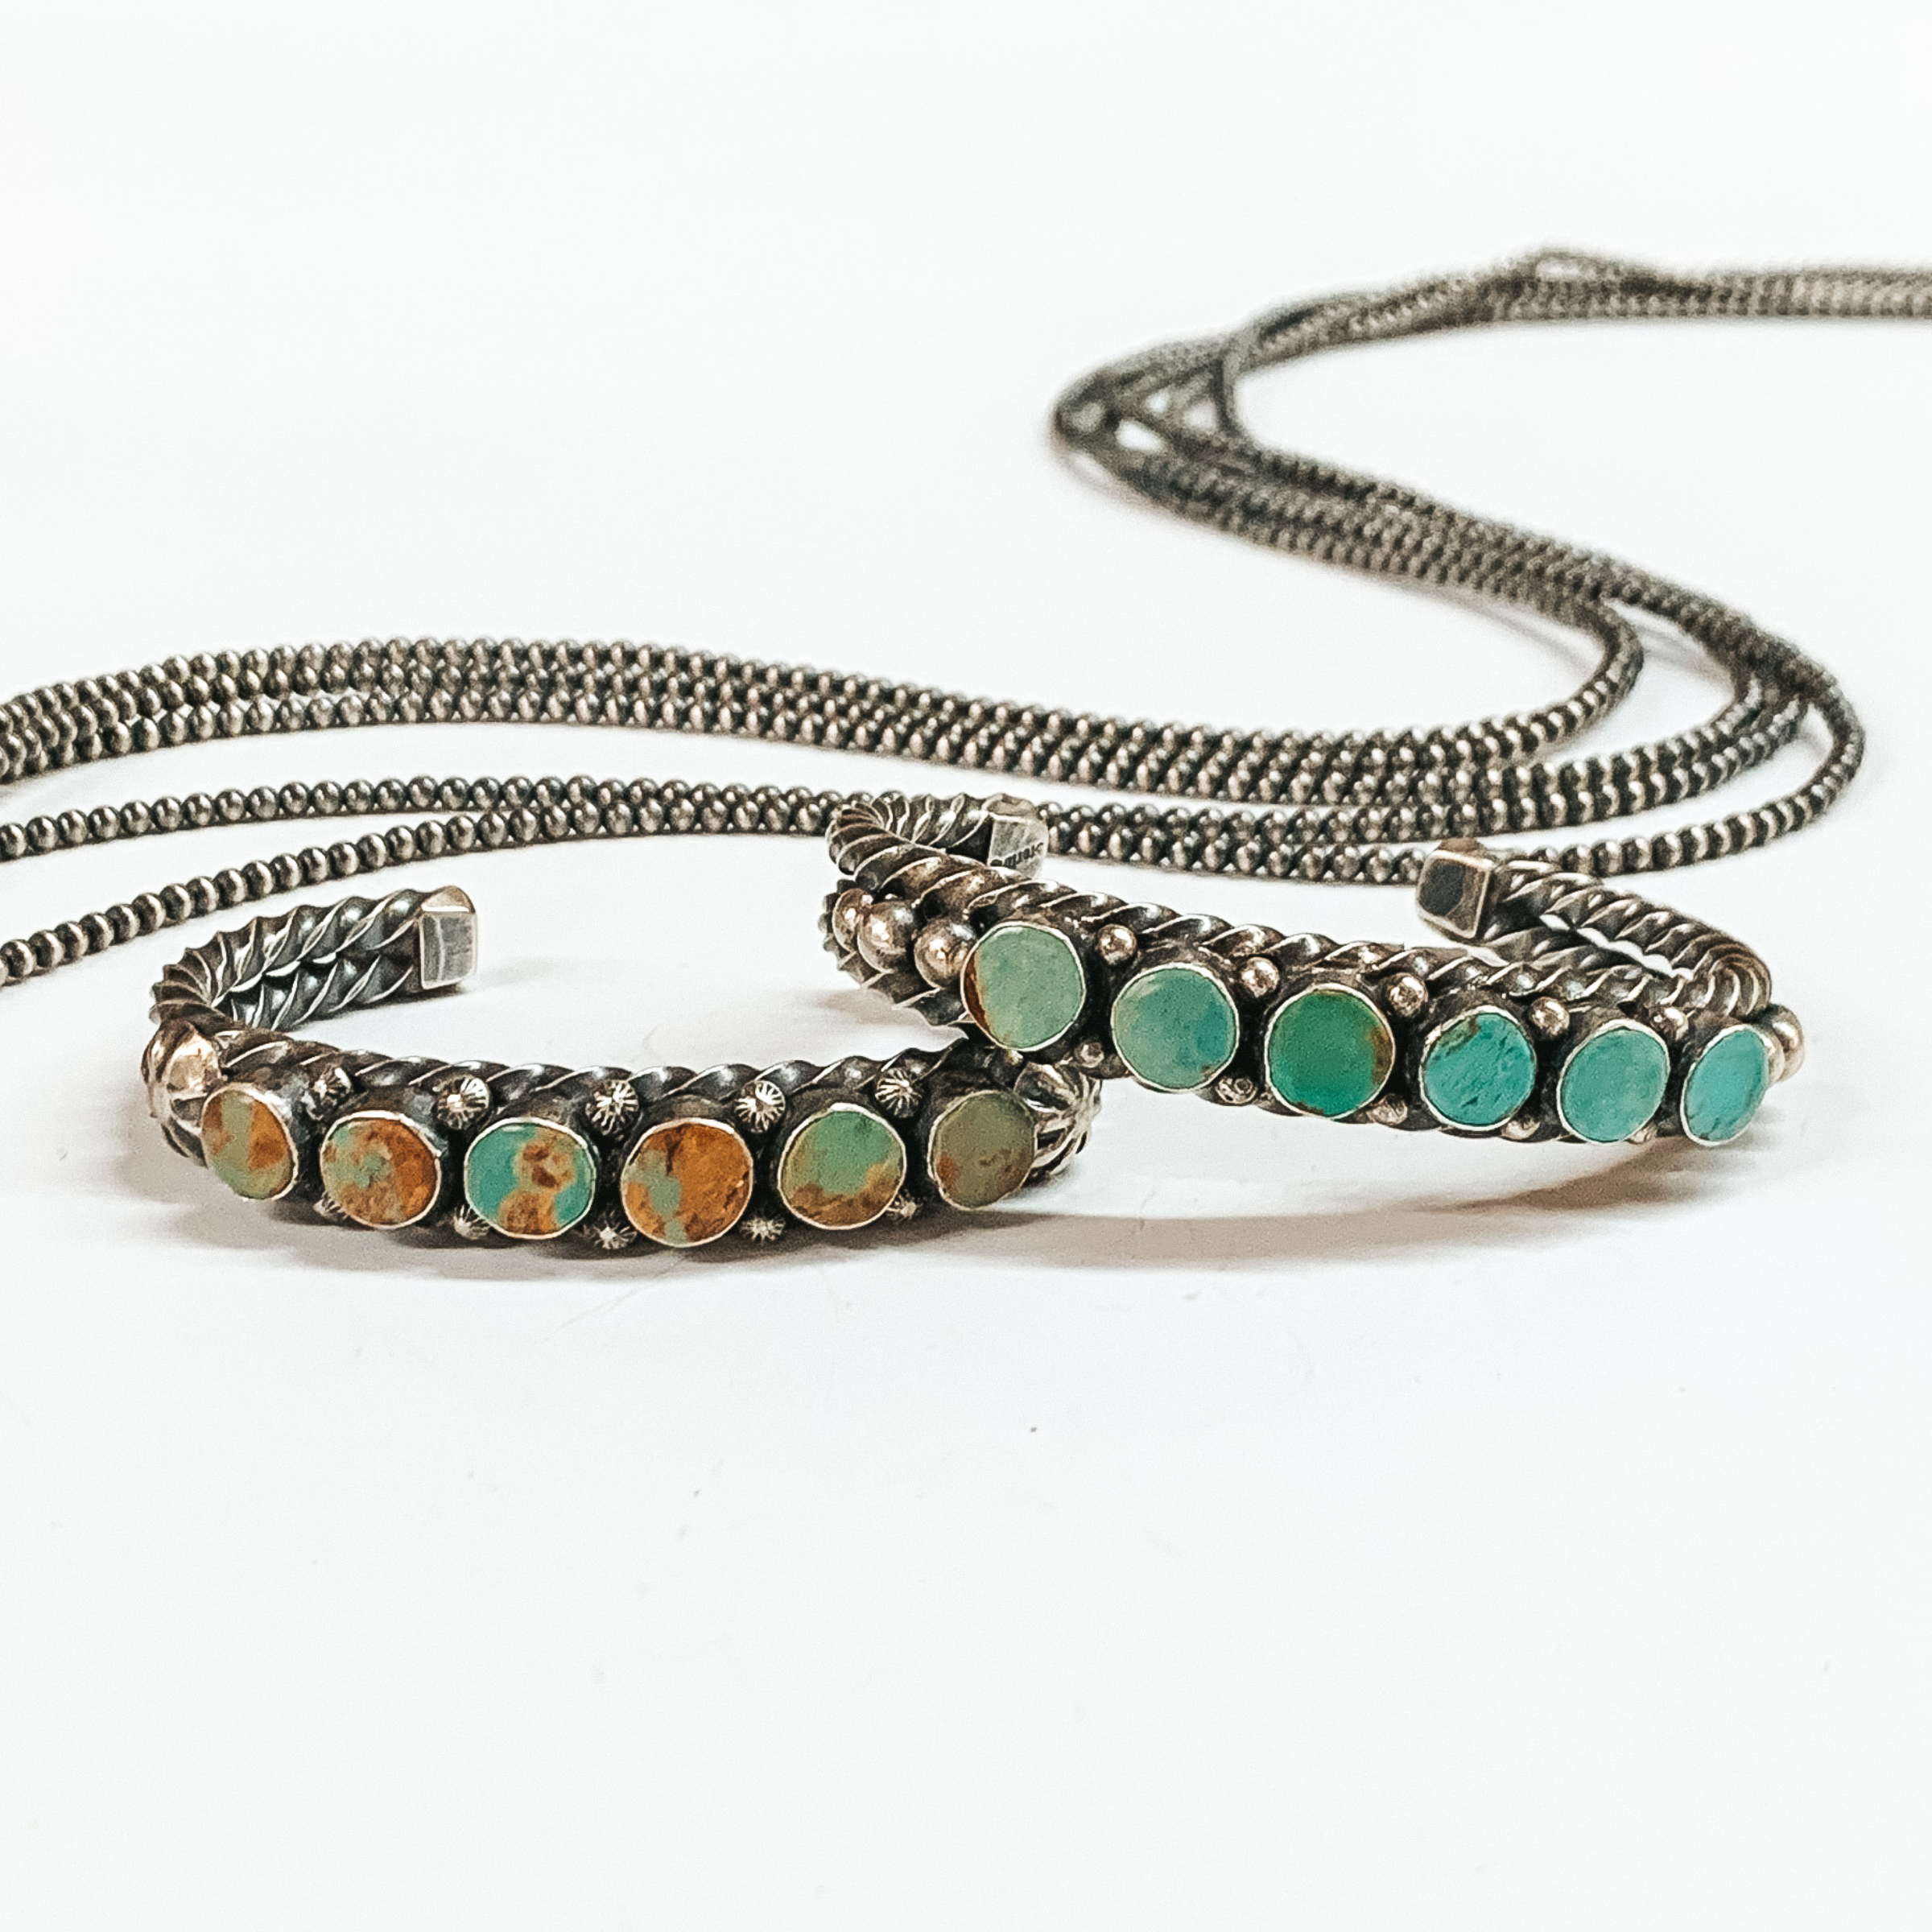 Two silver twisted bracelets with six turquoise stones. These bracelets are pictured on a white background with silver beads behind it. 